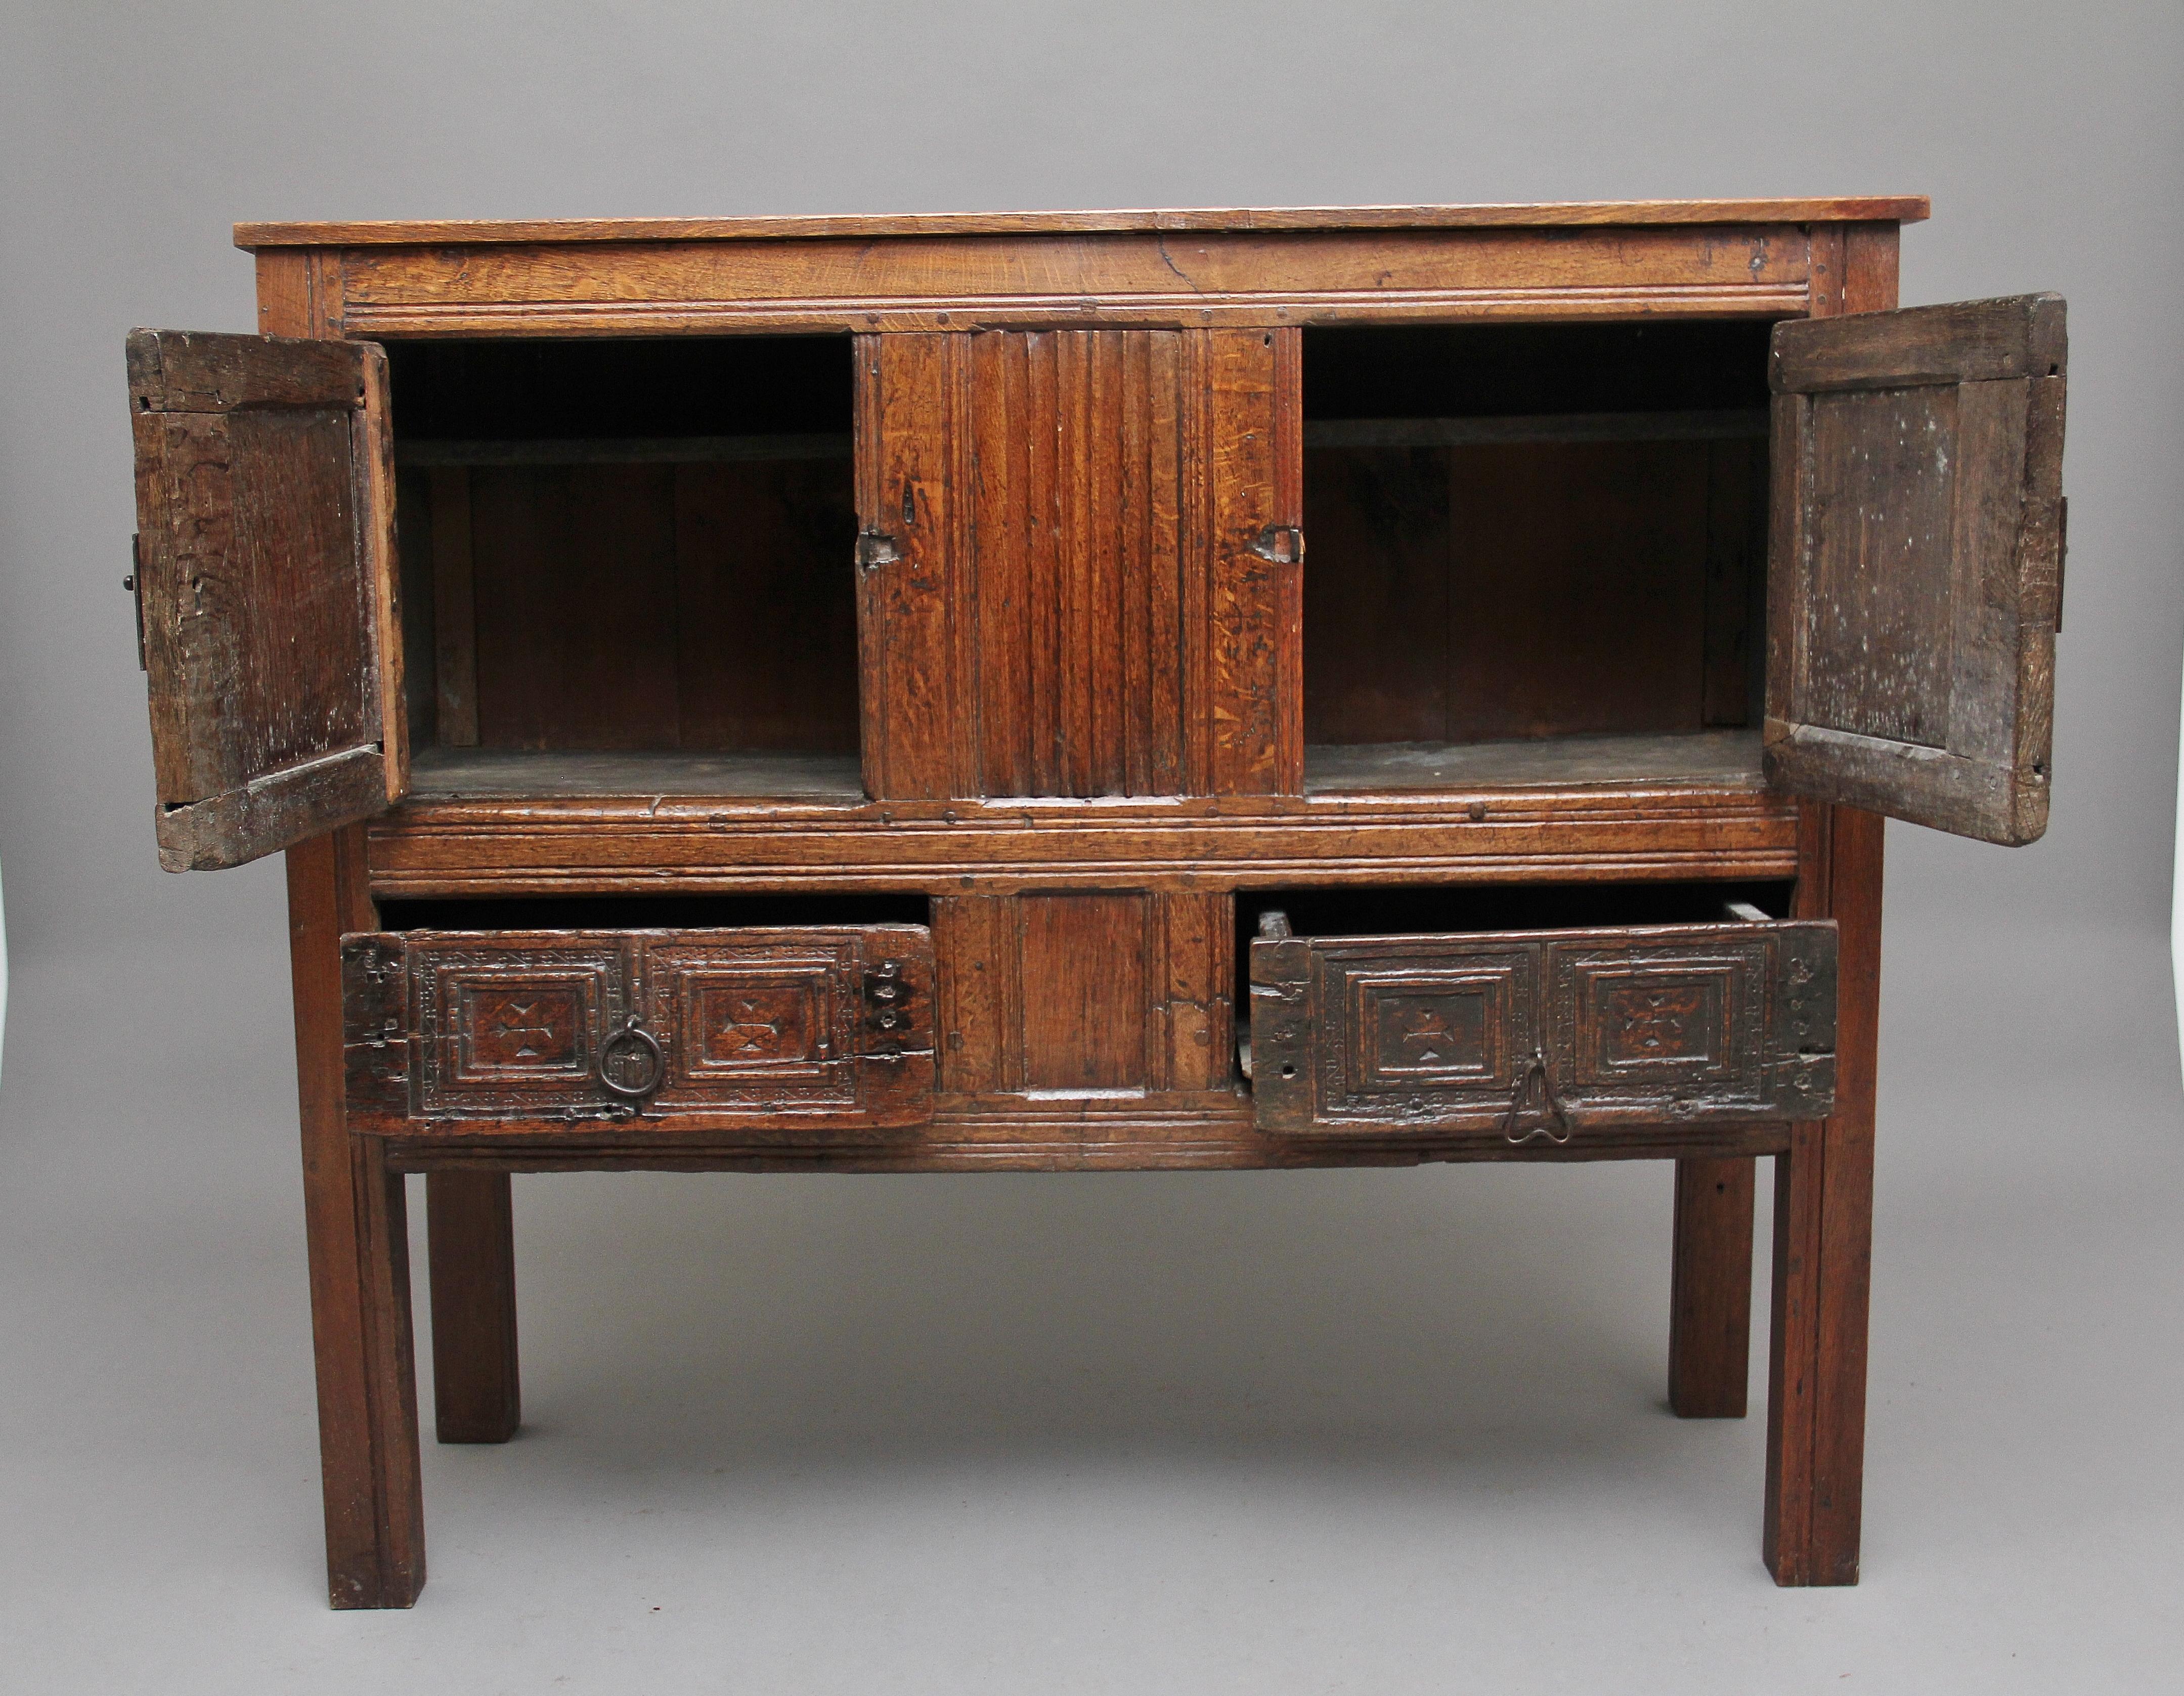 An antique oak aumbry / cupboard, this was more than likely made in part from a 16th Century aumbry, reconstructed in the late 18th century, it has linenfold & chip carving on the front, also iron butterfly hinges and door catches, the cupboard